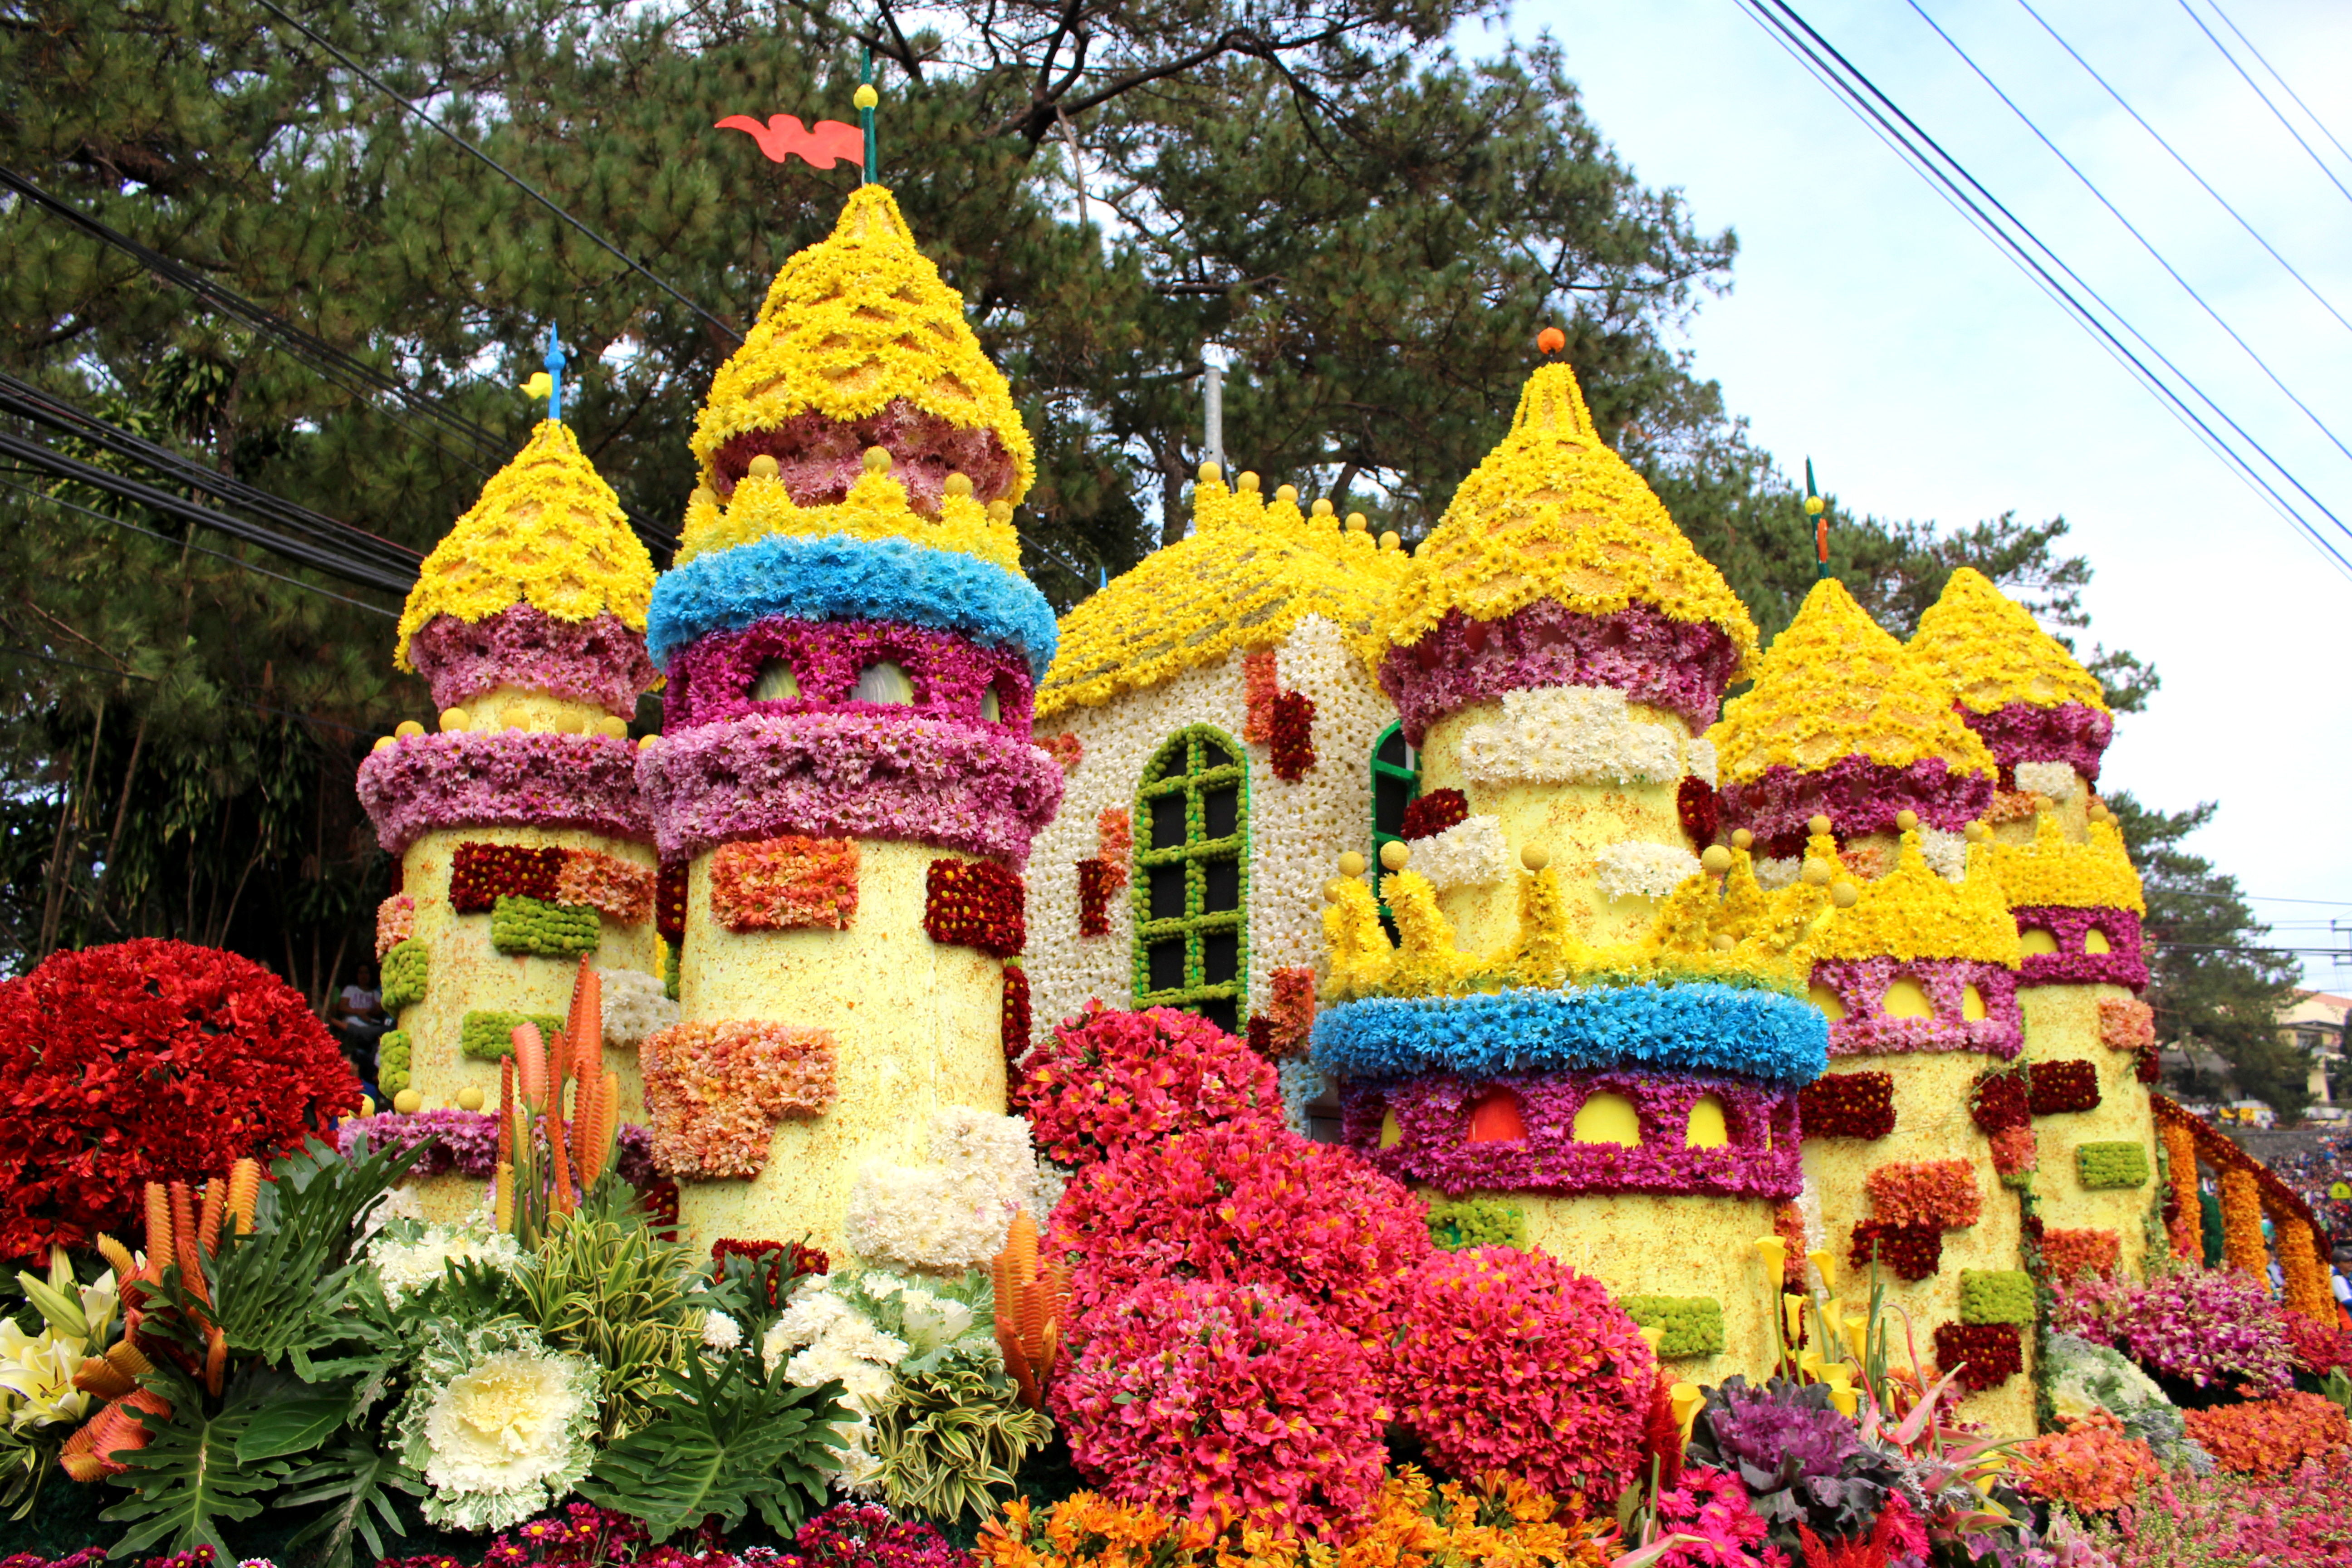 IN PHOTOS: Stunning floats in full bloom at Panagbenga 2016